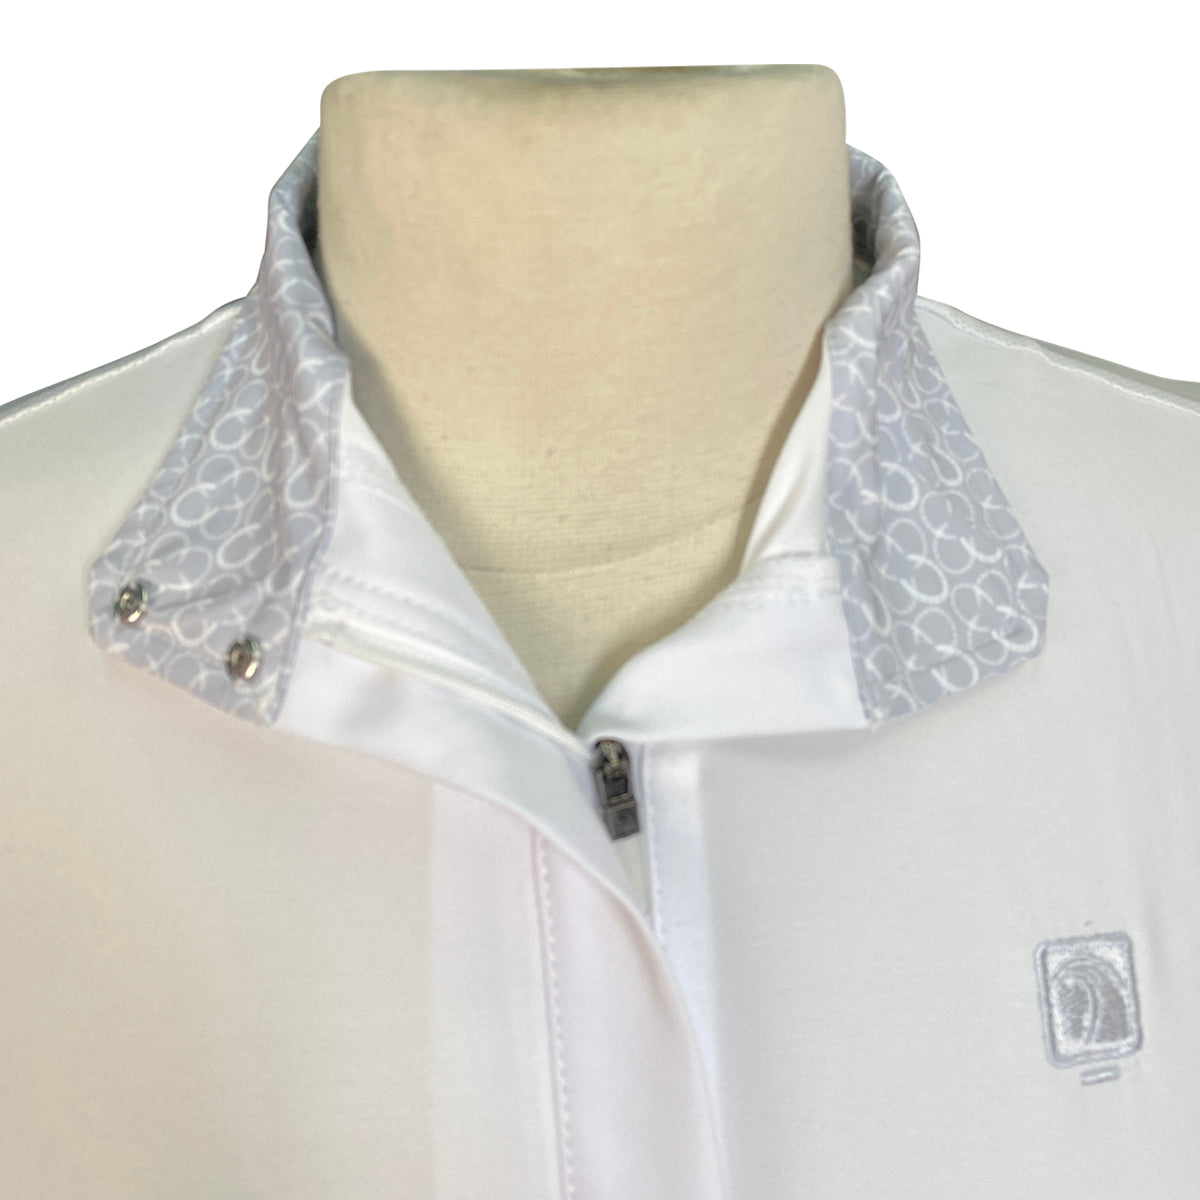 Romfh &#39;Lindsay&#39; Chill Factor Show Shirt in Grey Horseshoes/White